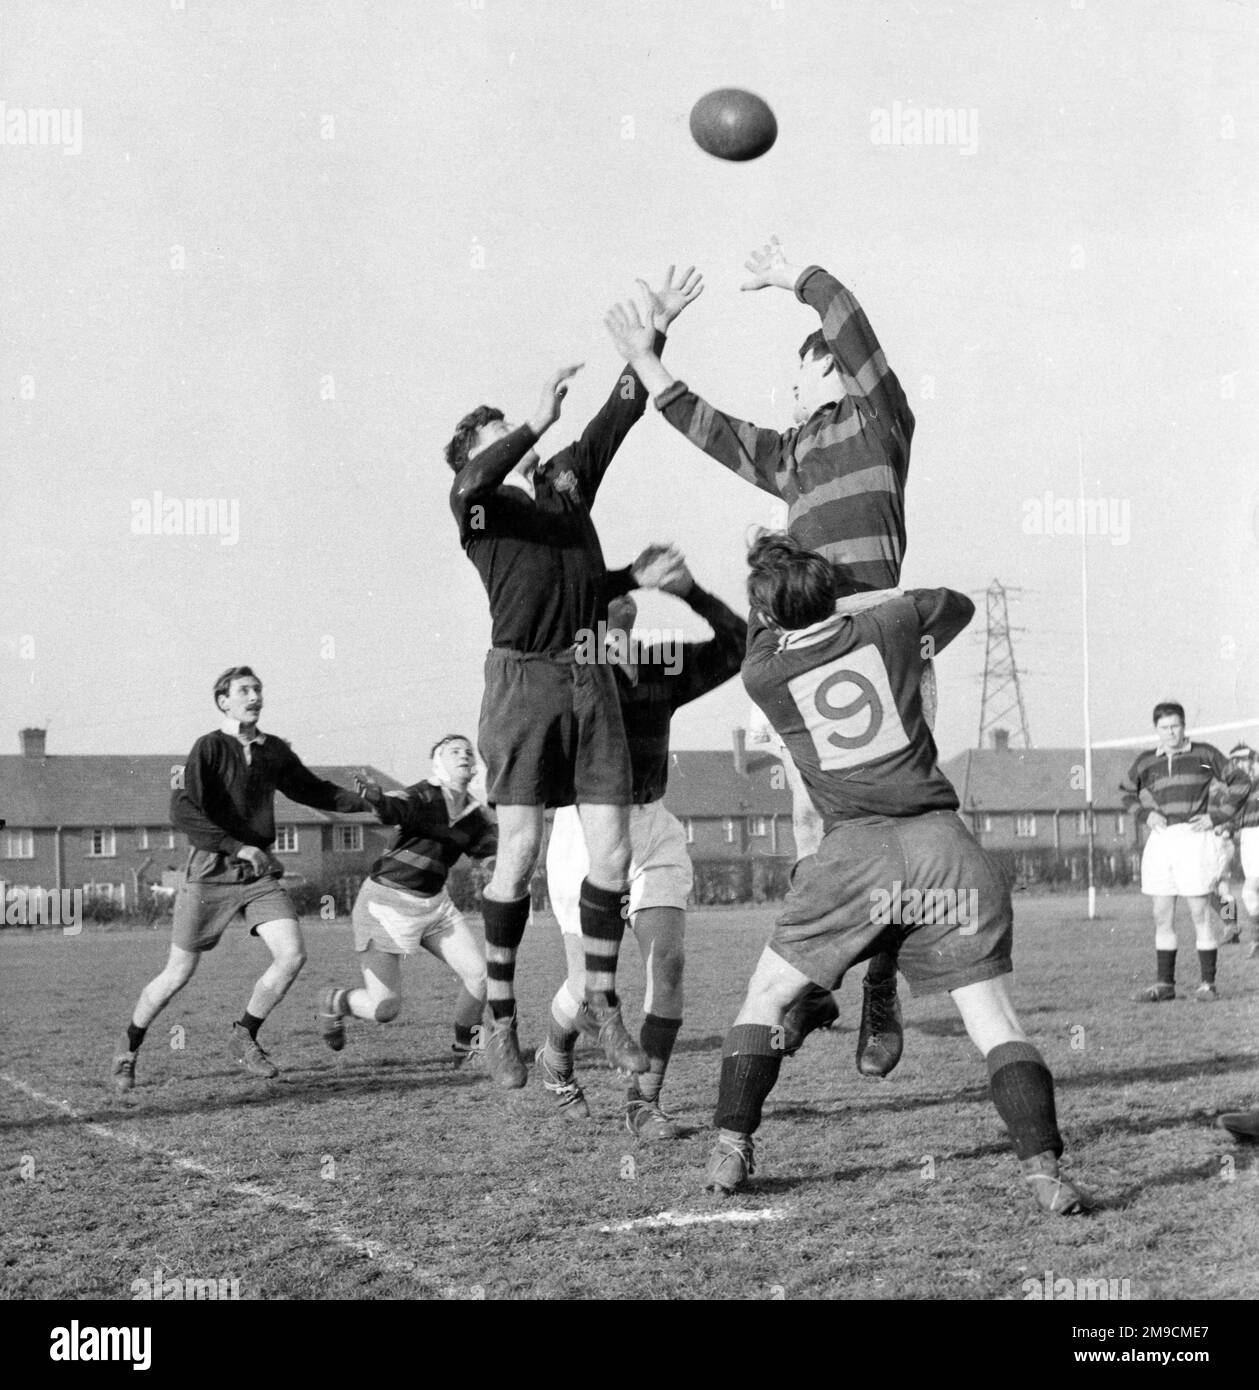 Jumping for the ball during a lively school rugby match at Staines, Middlesex, England. Stock Photo